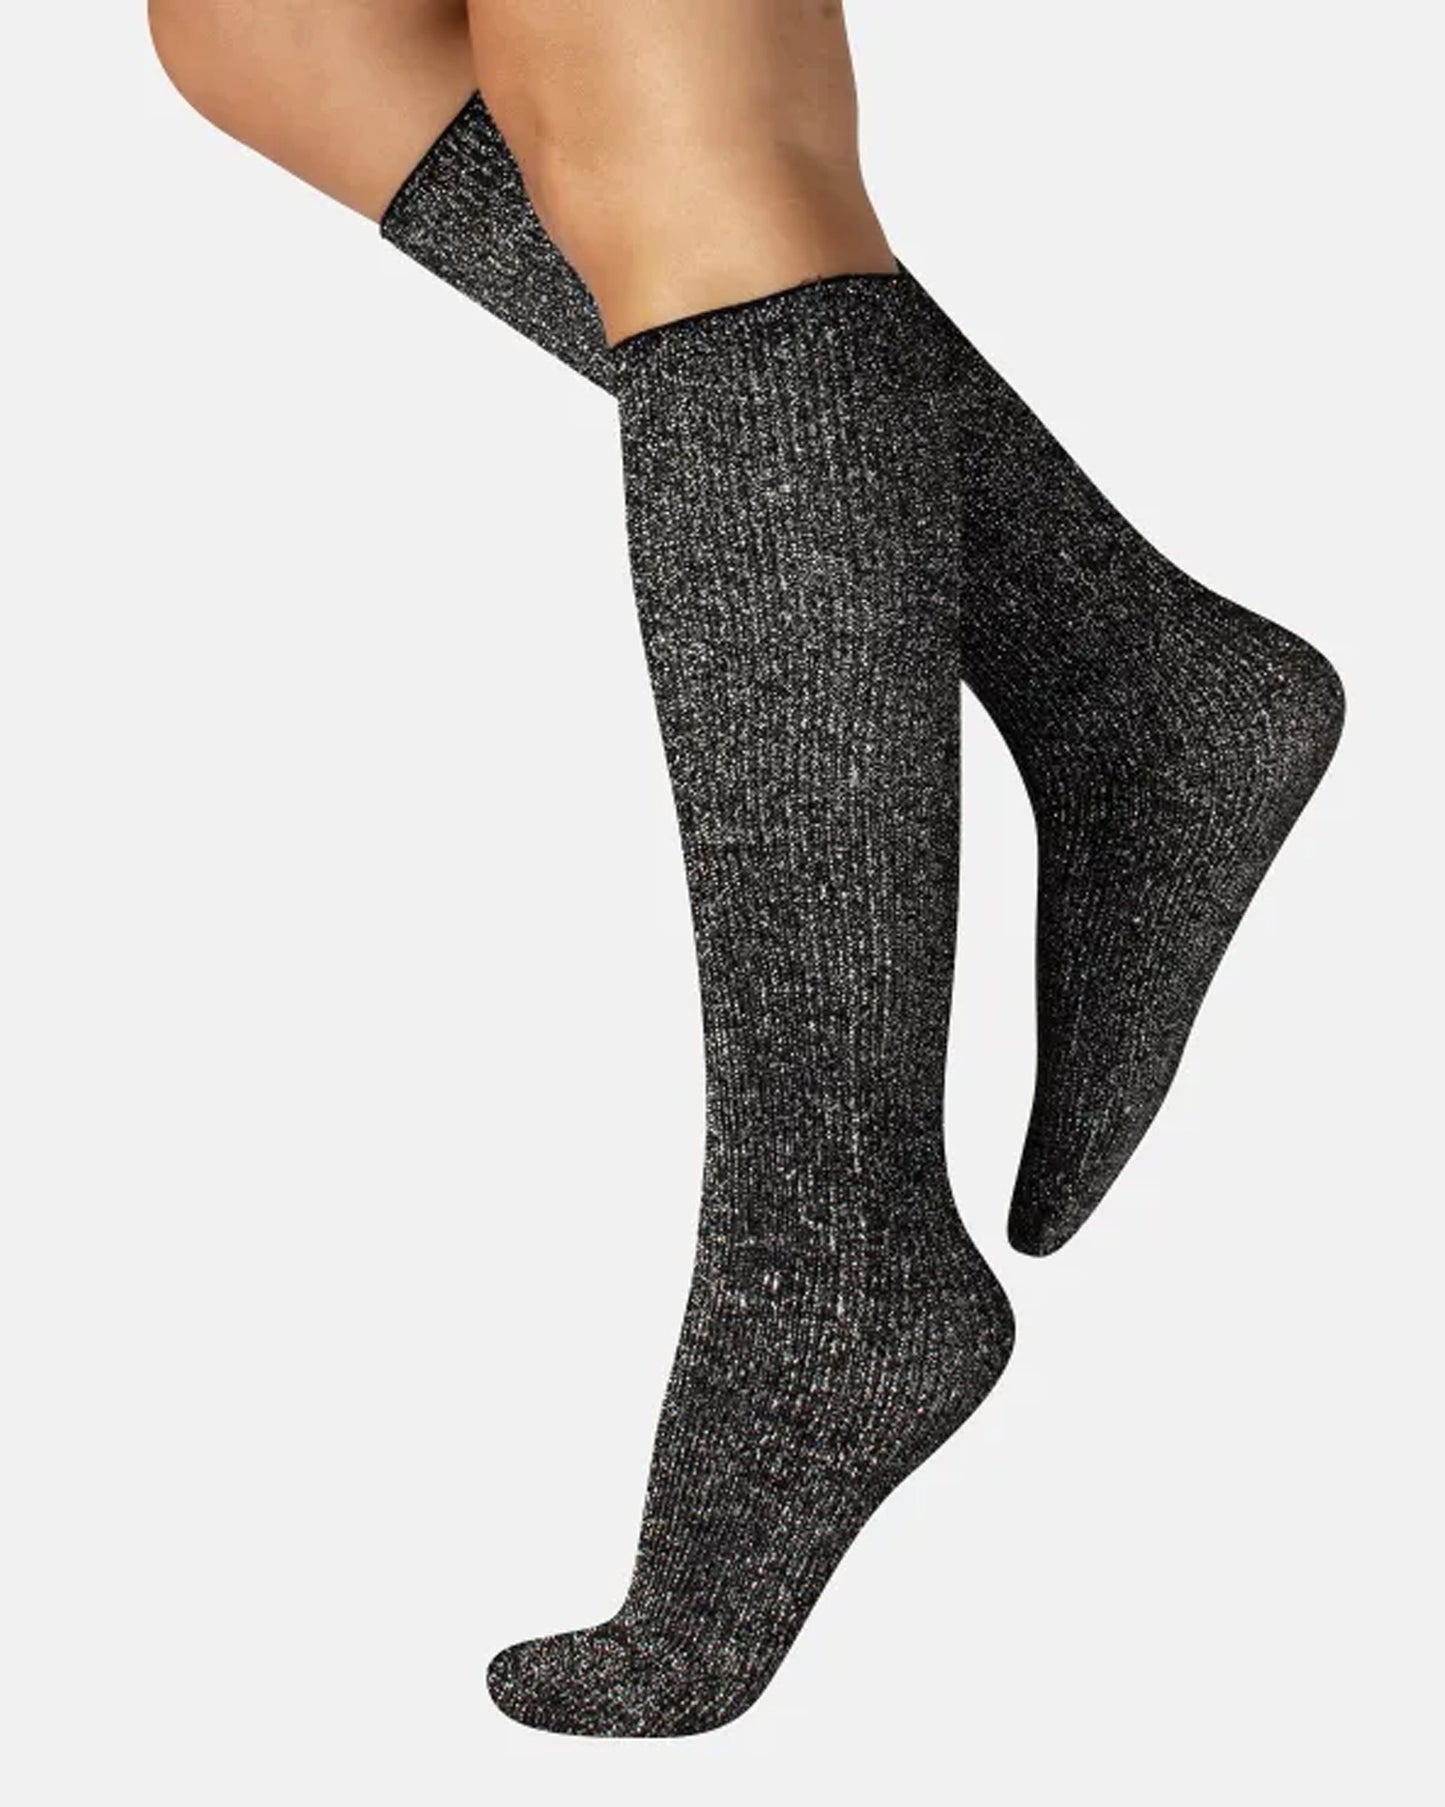 Calzitaly Glitter Rib Sock - Black opaque knee-high fashion ribbed socks with silver lamé